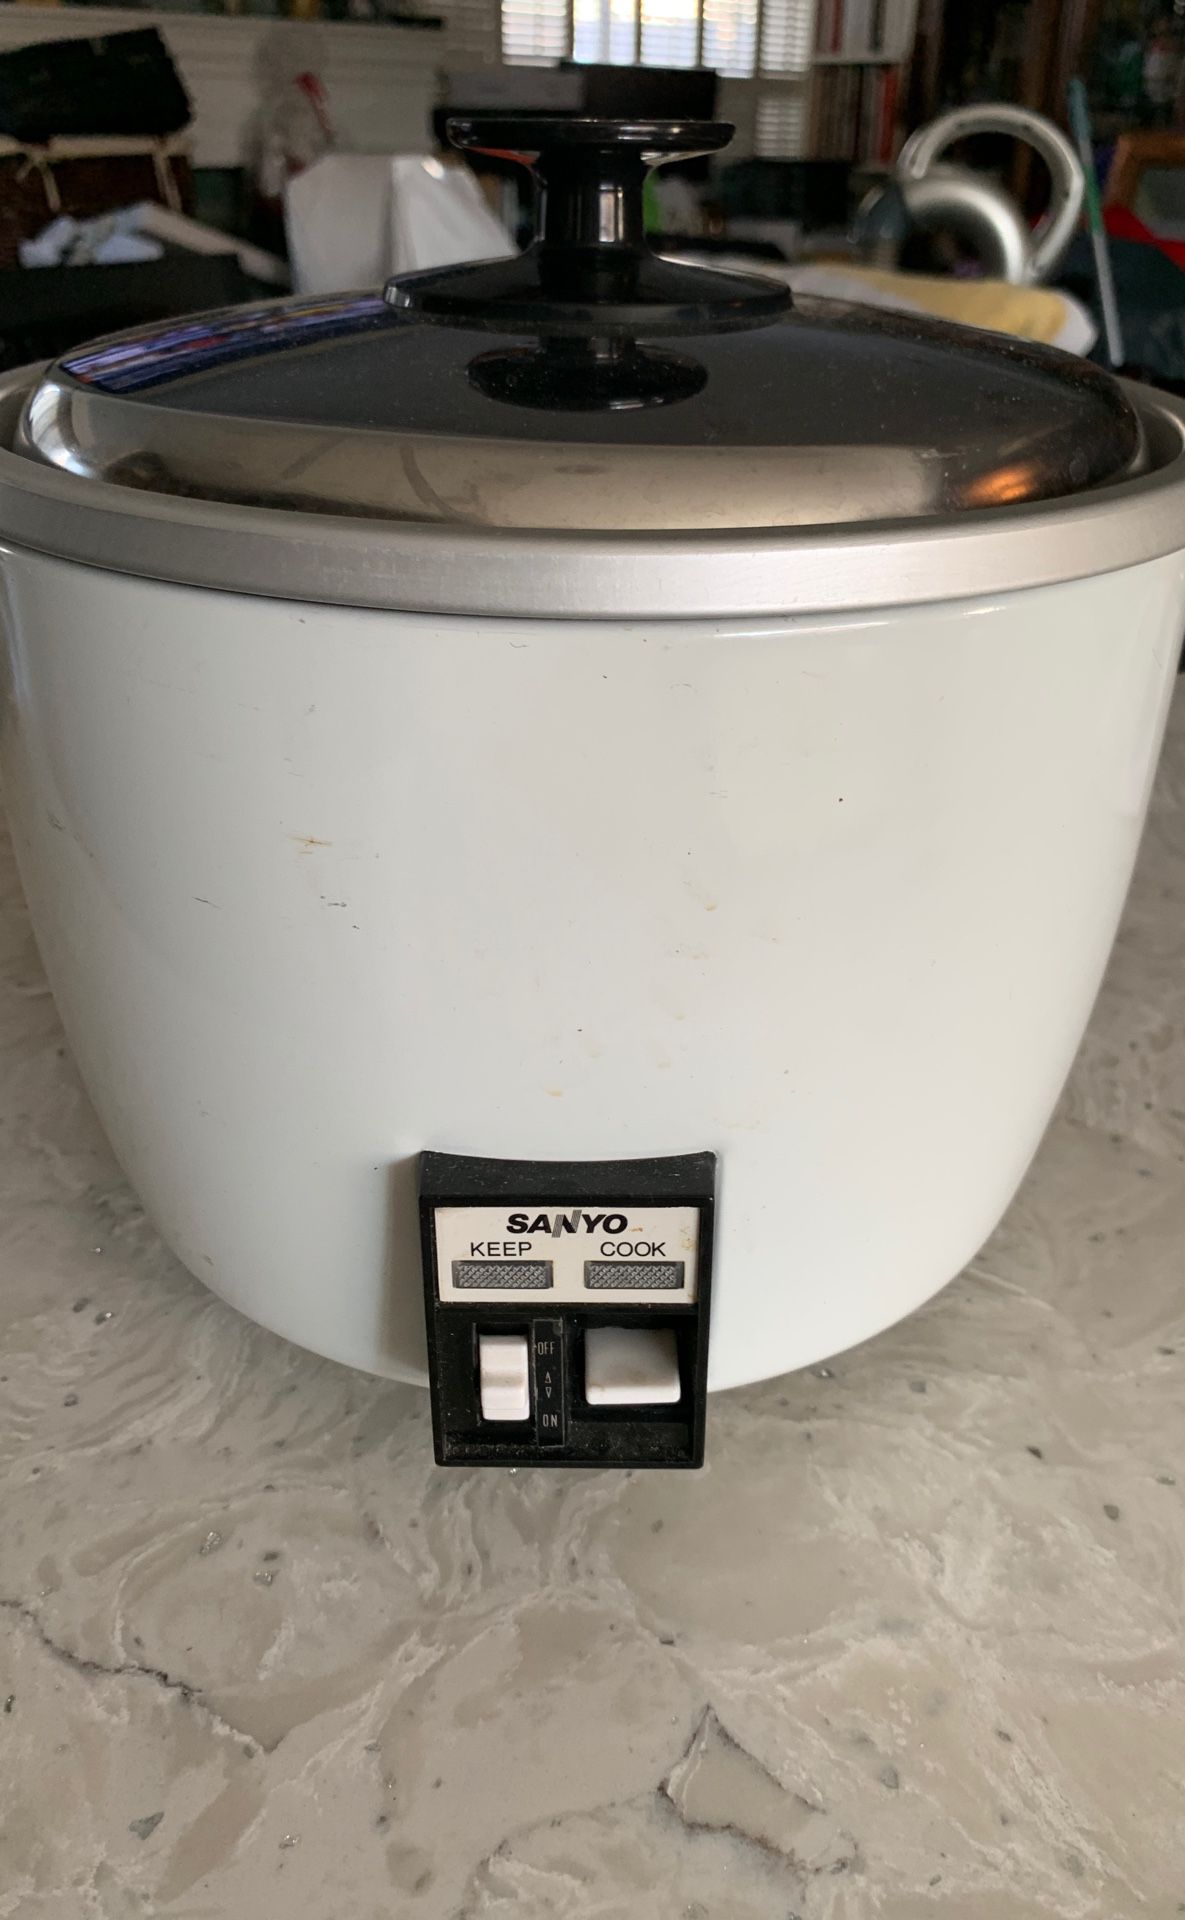 Sanyo Rice Cooker Brand New Never Used